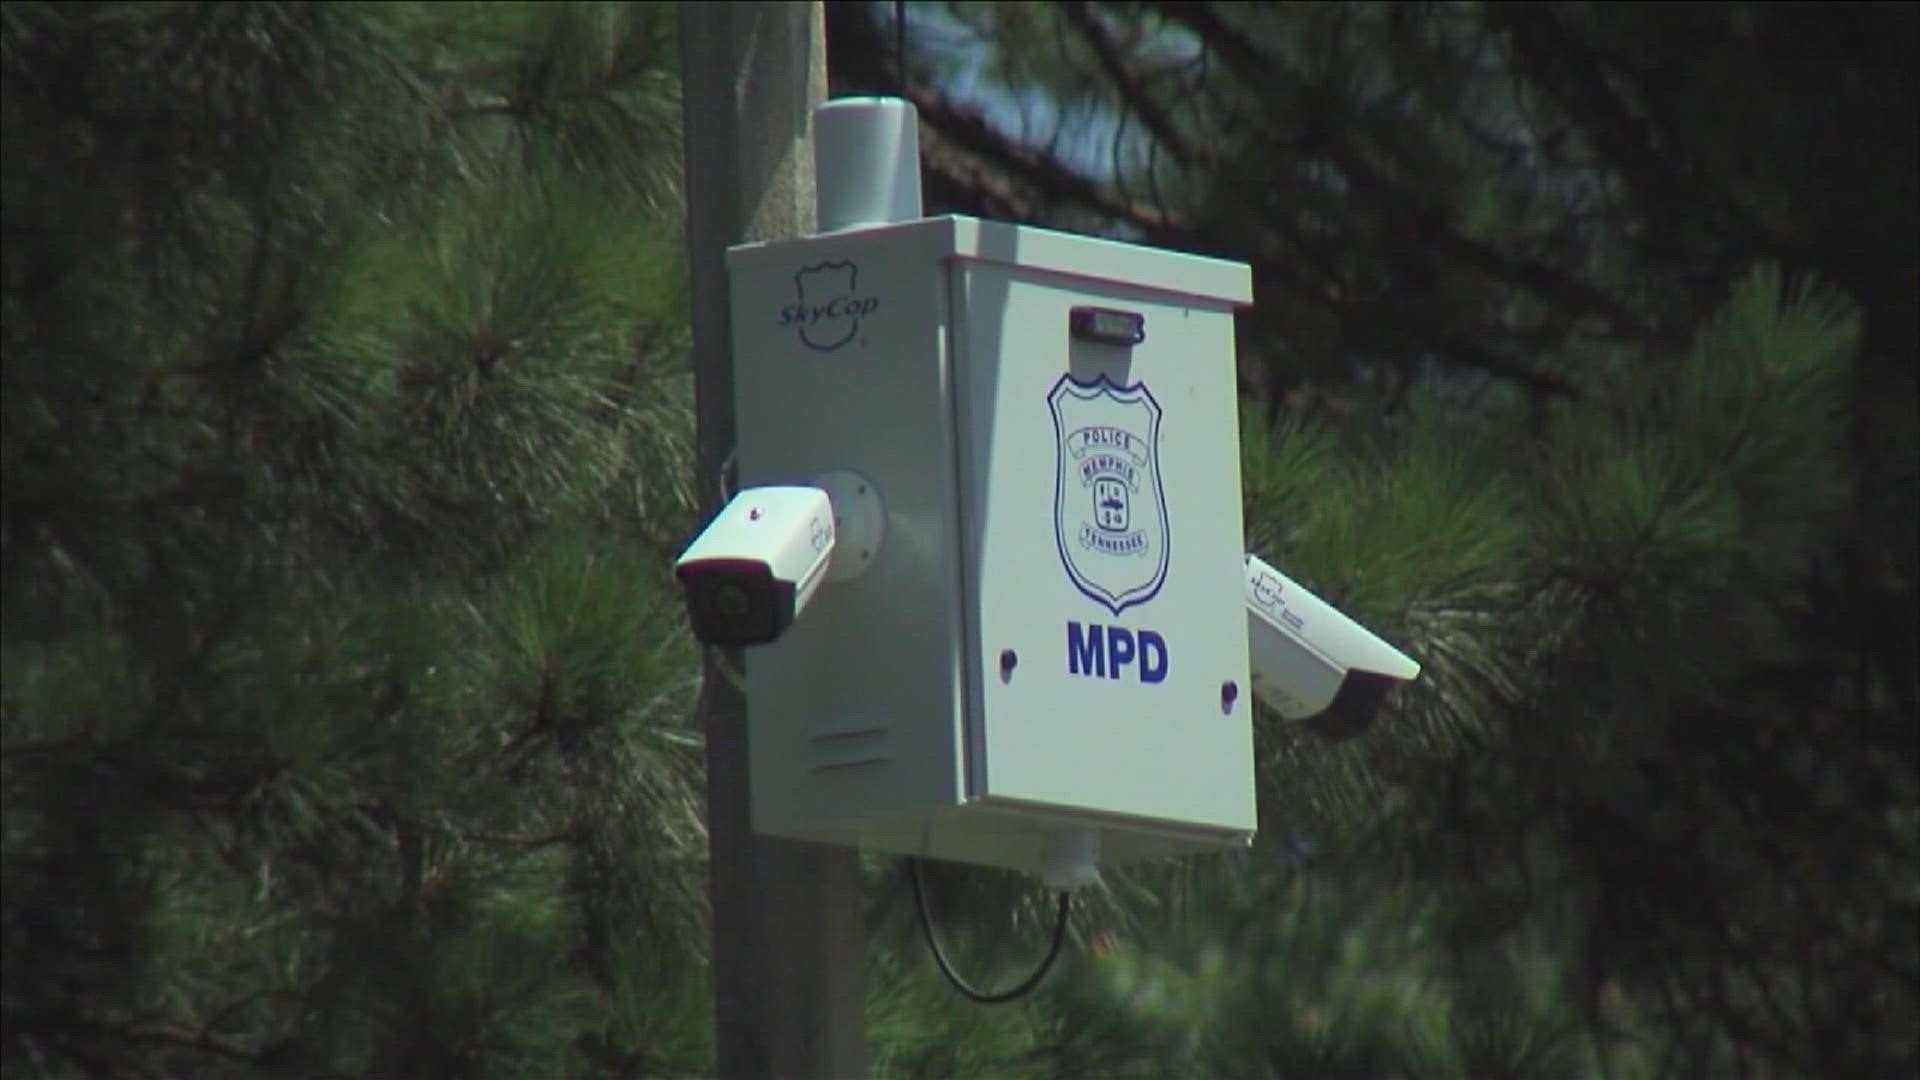 Richard Ransom explains if the SkyCop cameras installed across Memphis are really doing their job of deterring crime.